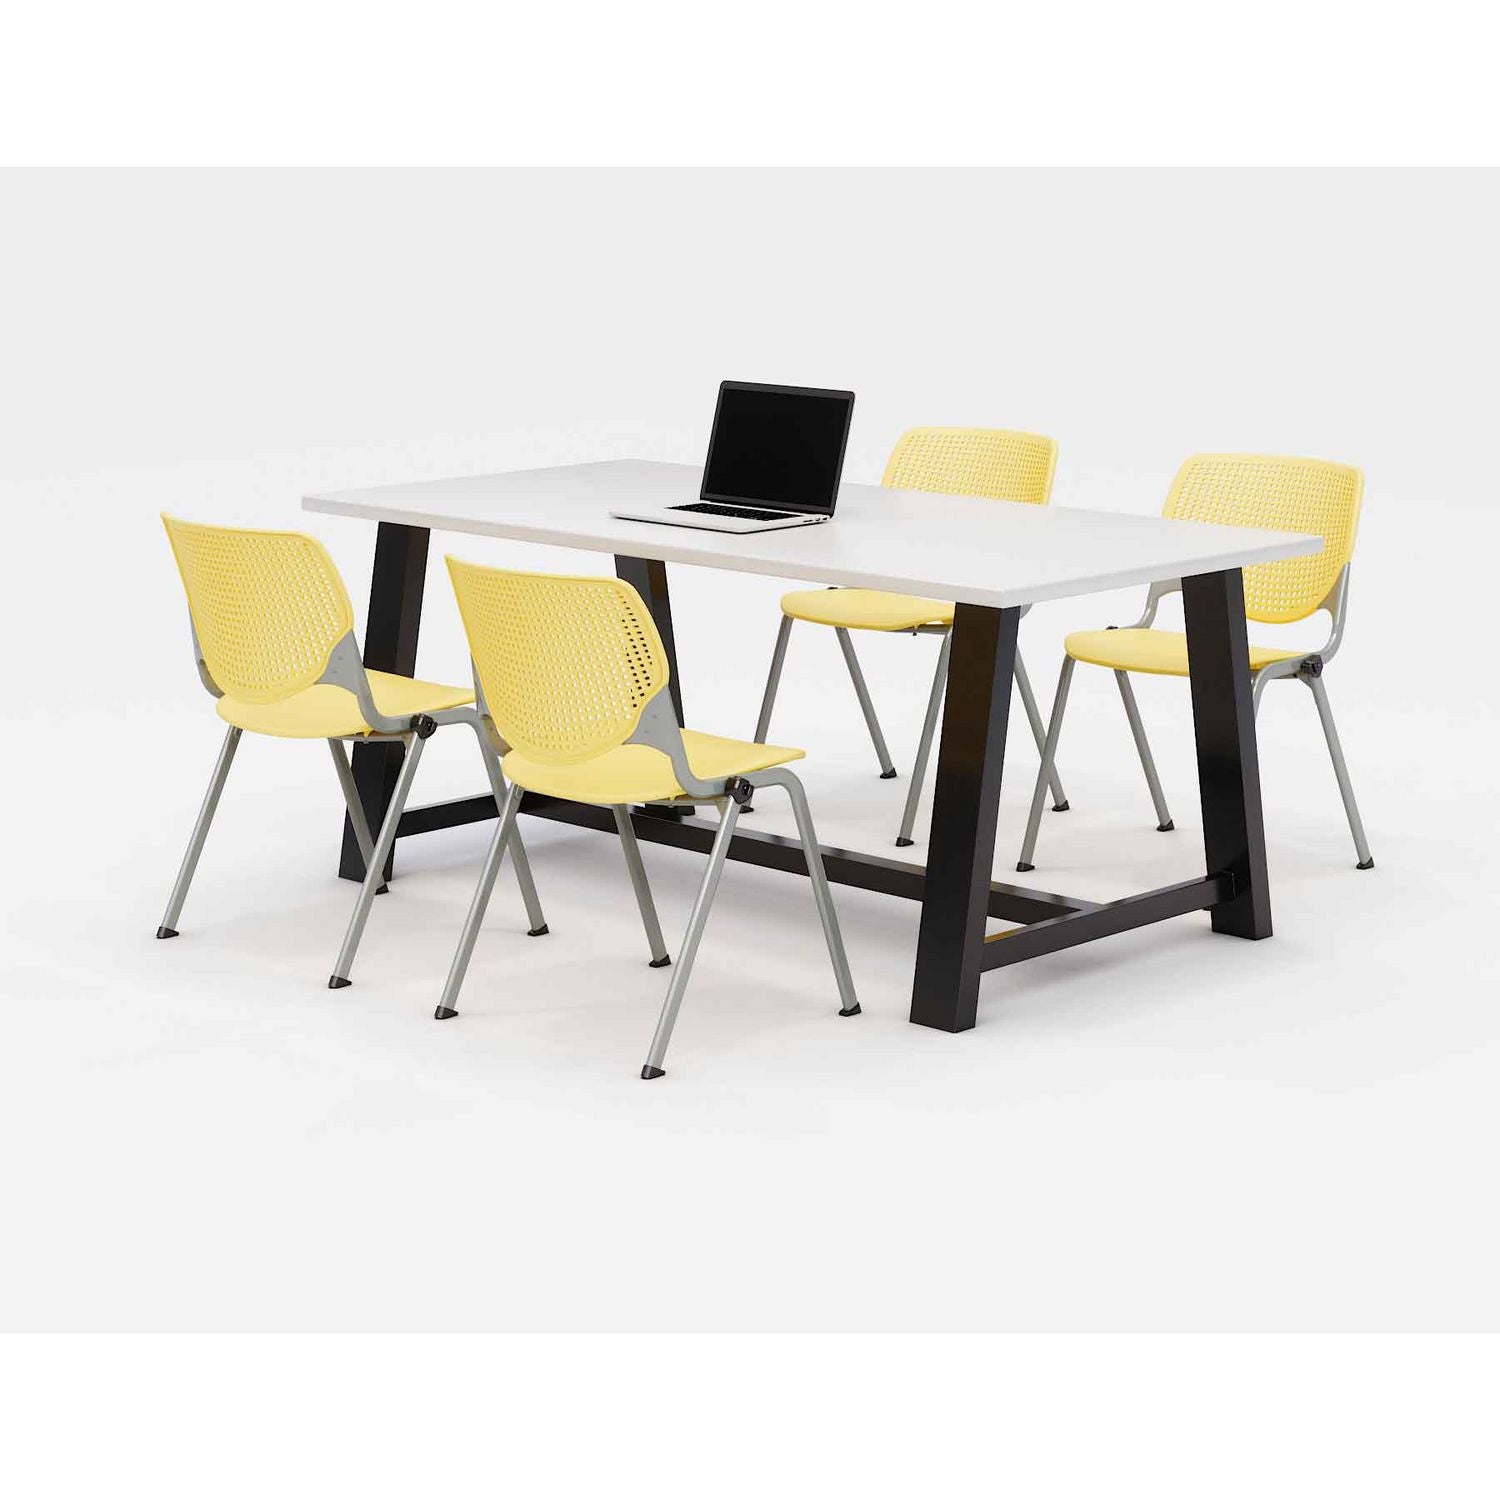 midtown-dining-table-with-four-yellow-kool-series-chairs-36-x-72-x-30-designer-white-ships-in-4-6-business-days_kfi840031900289 - 1